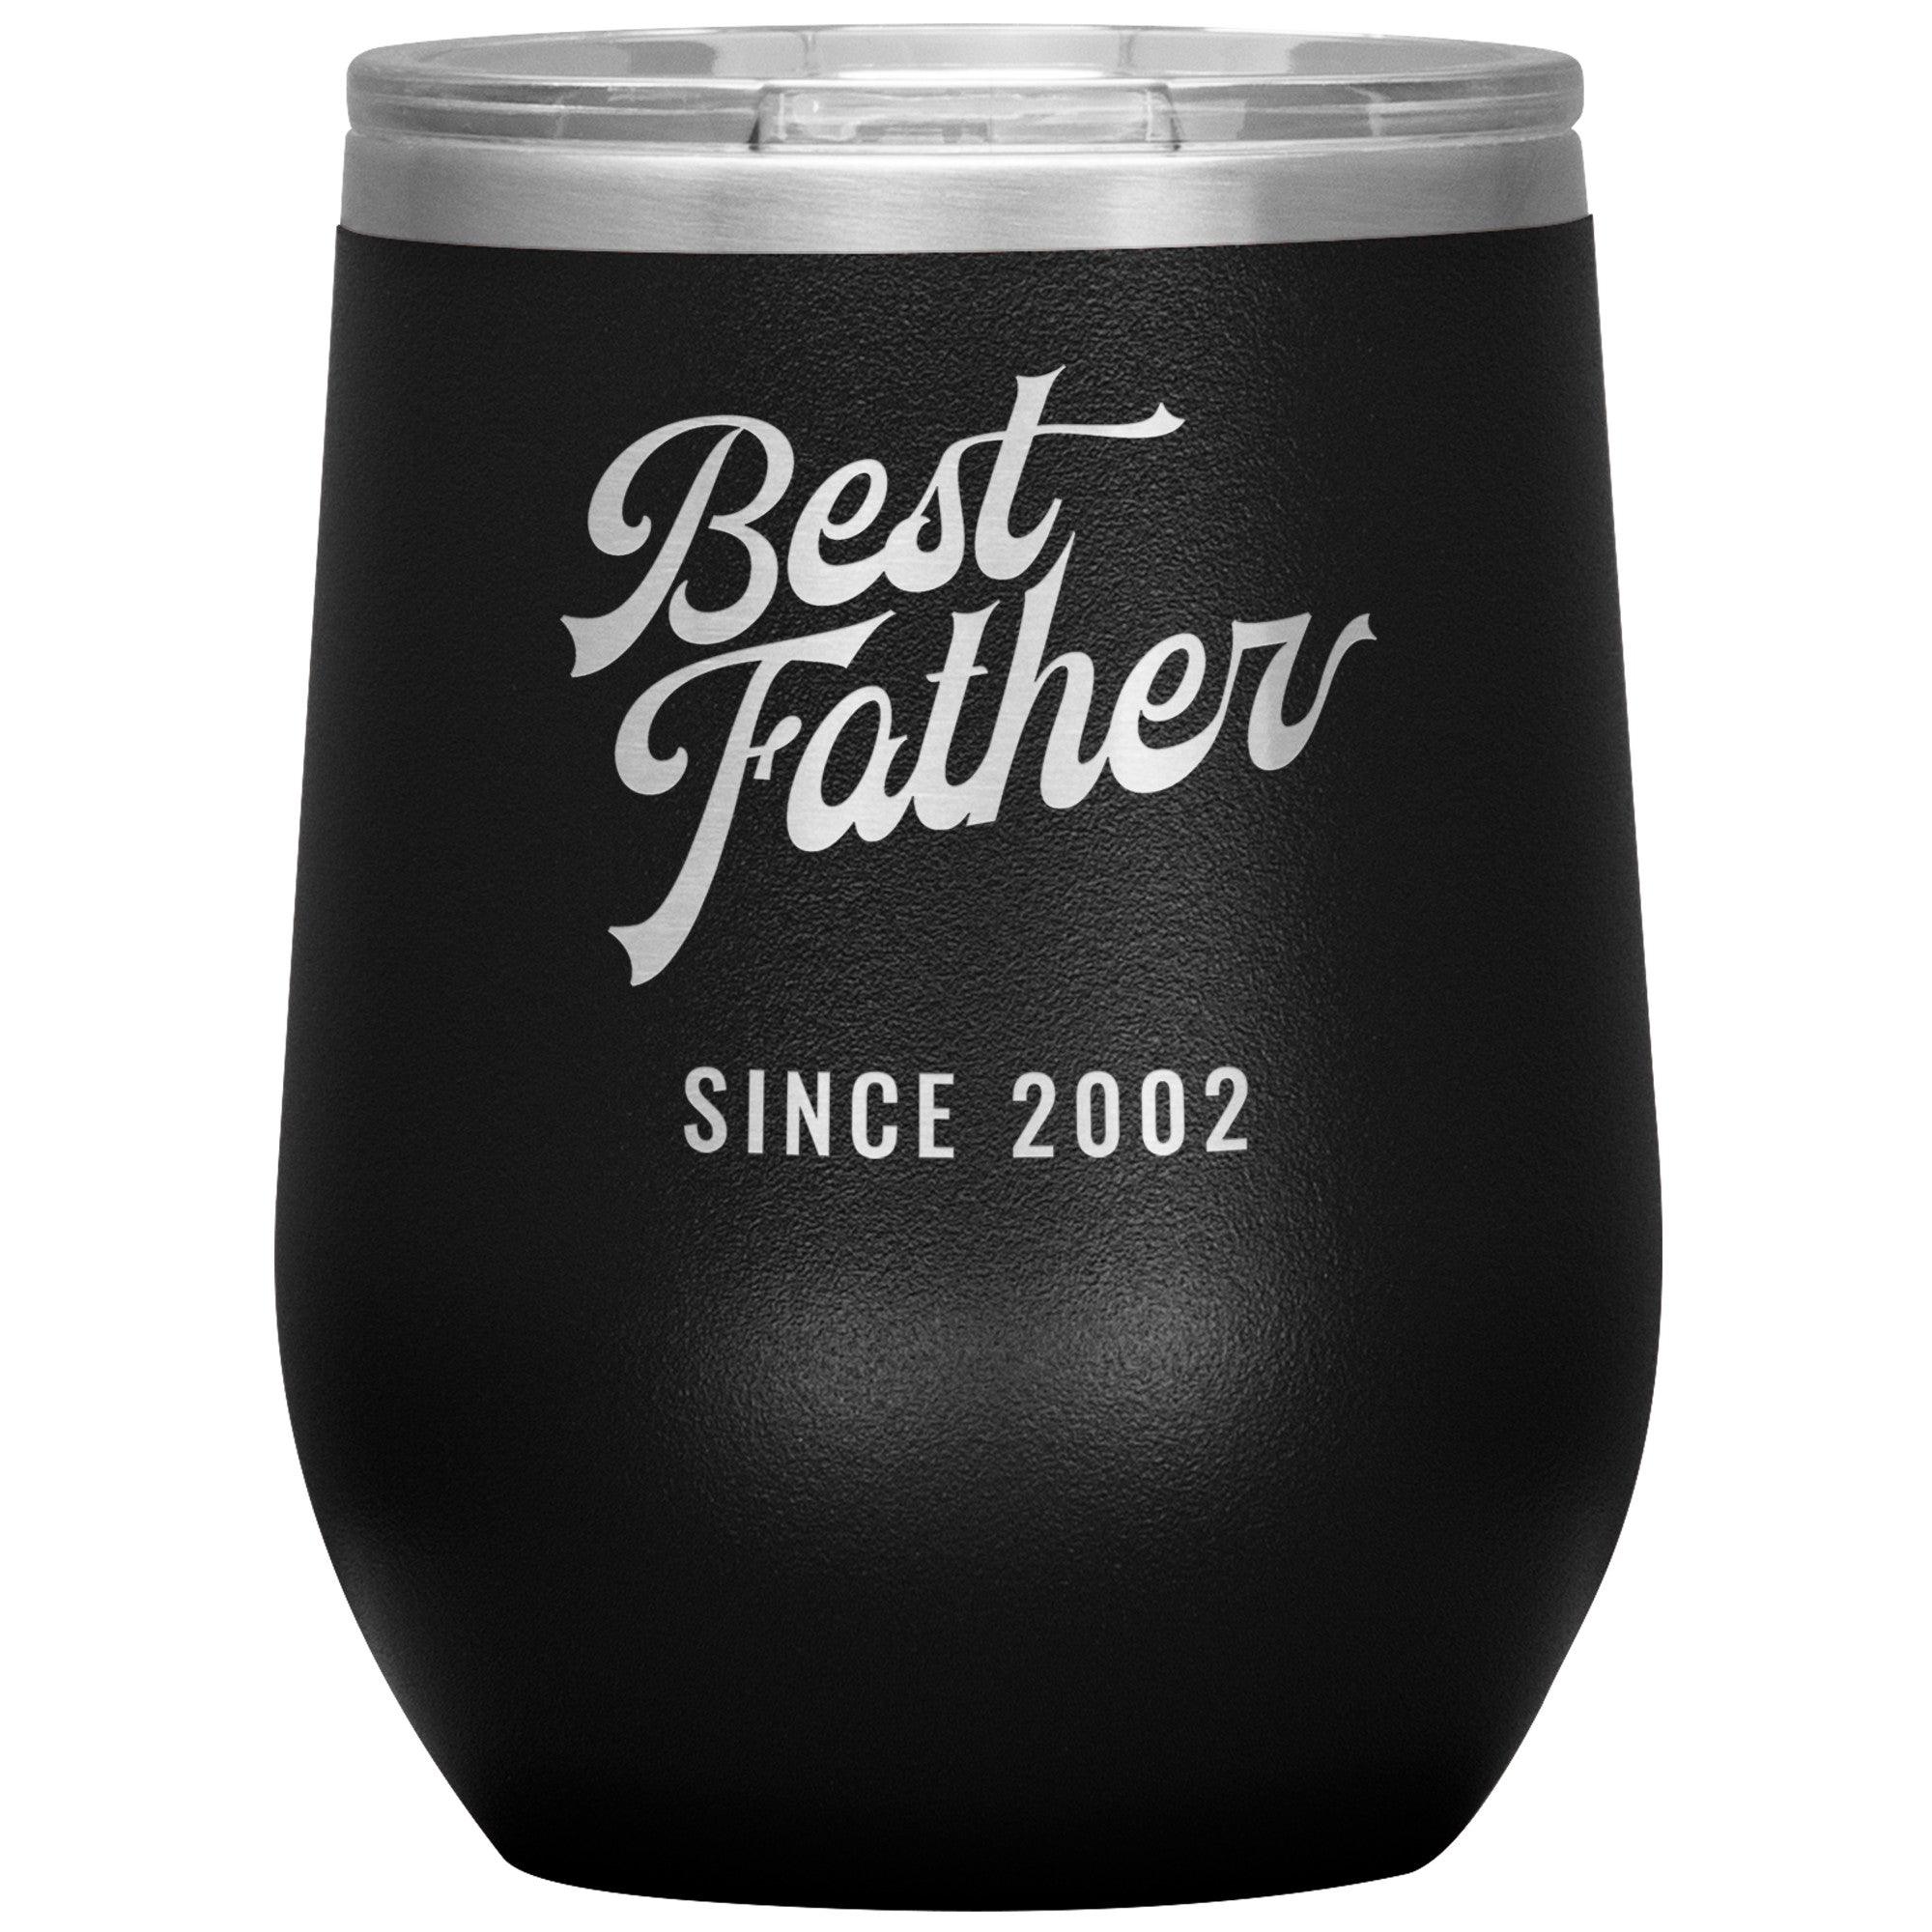 Best Father Since 2002 - 12oz Insulated Wine Tumbler